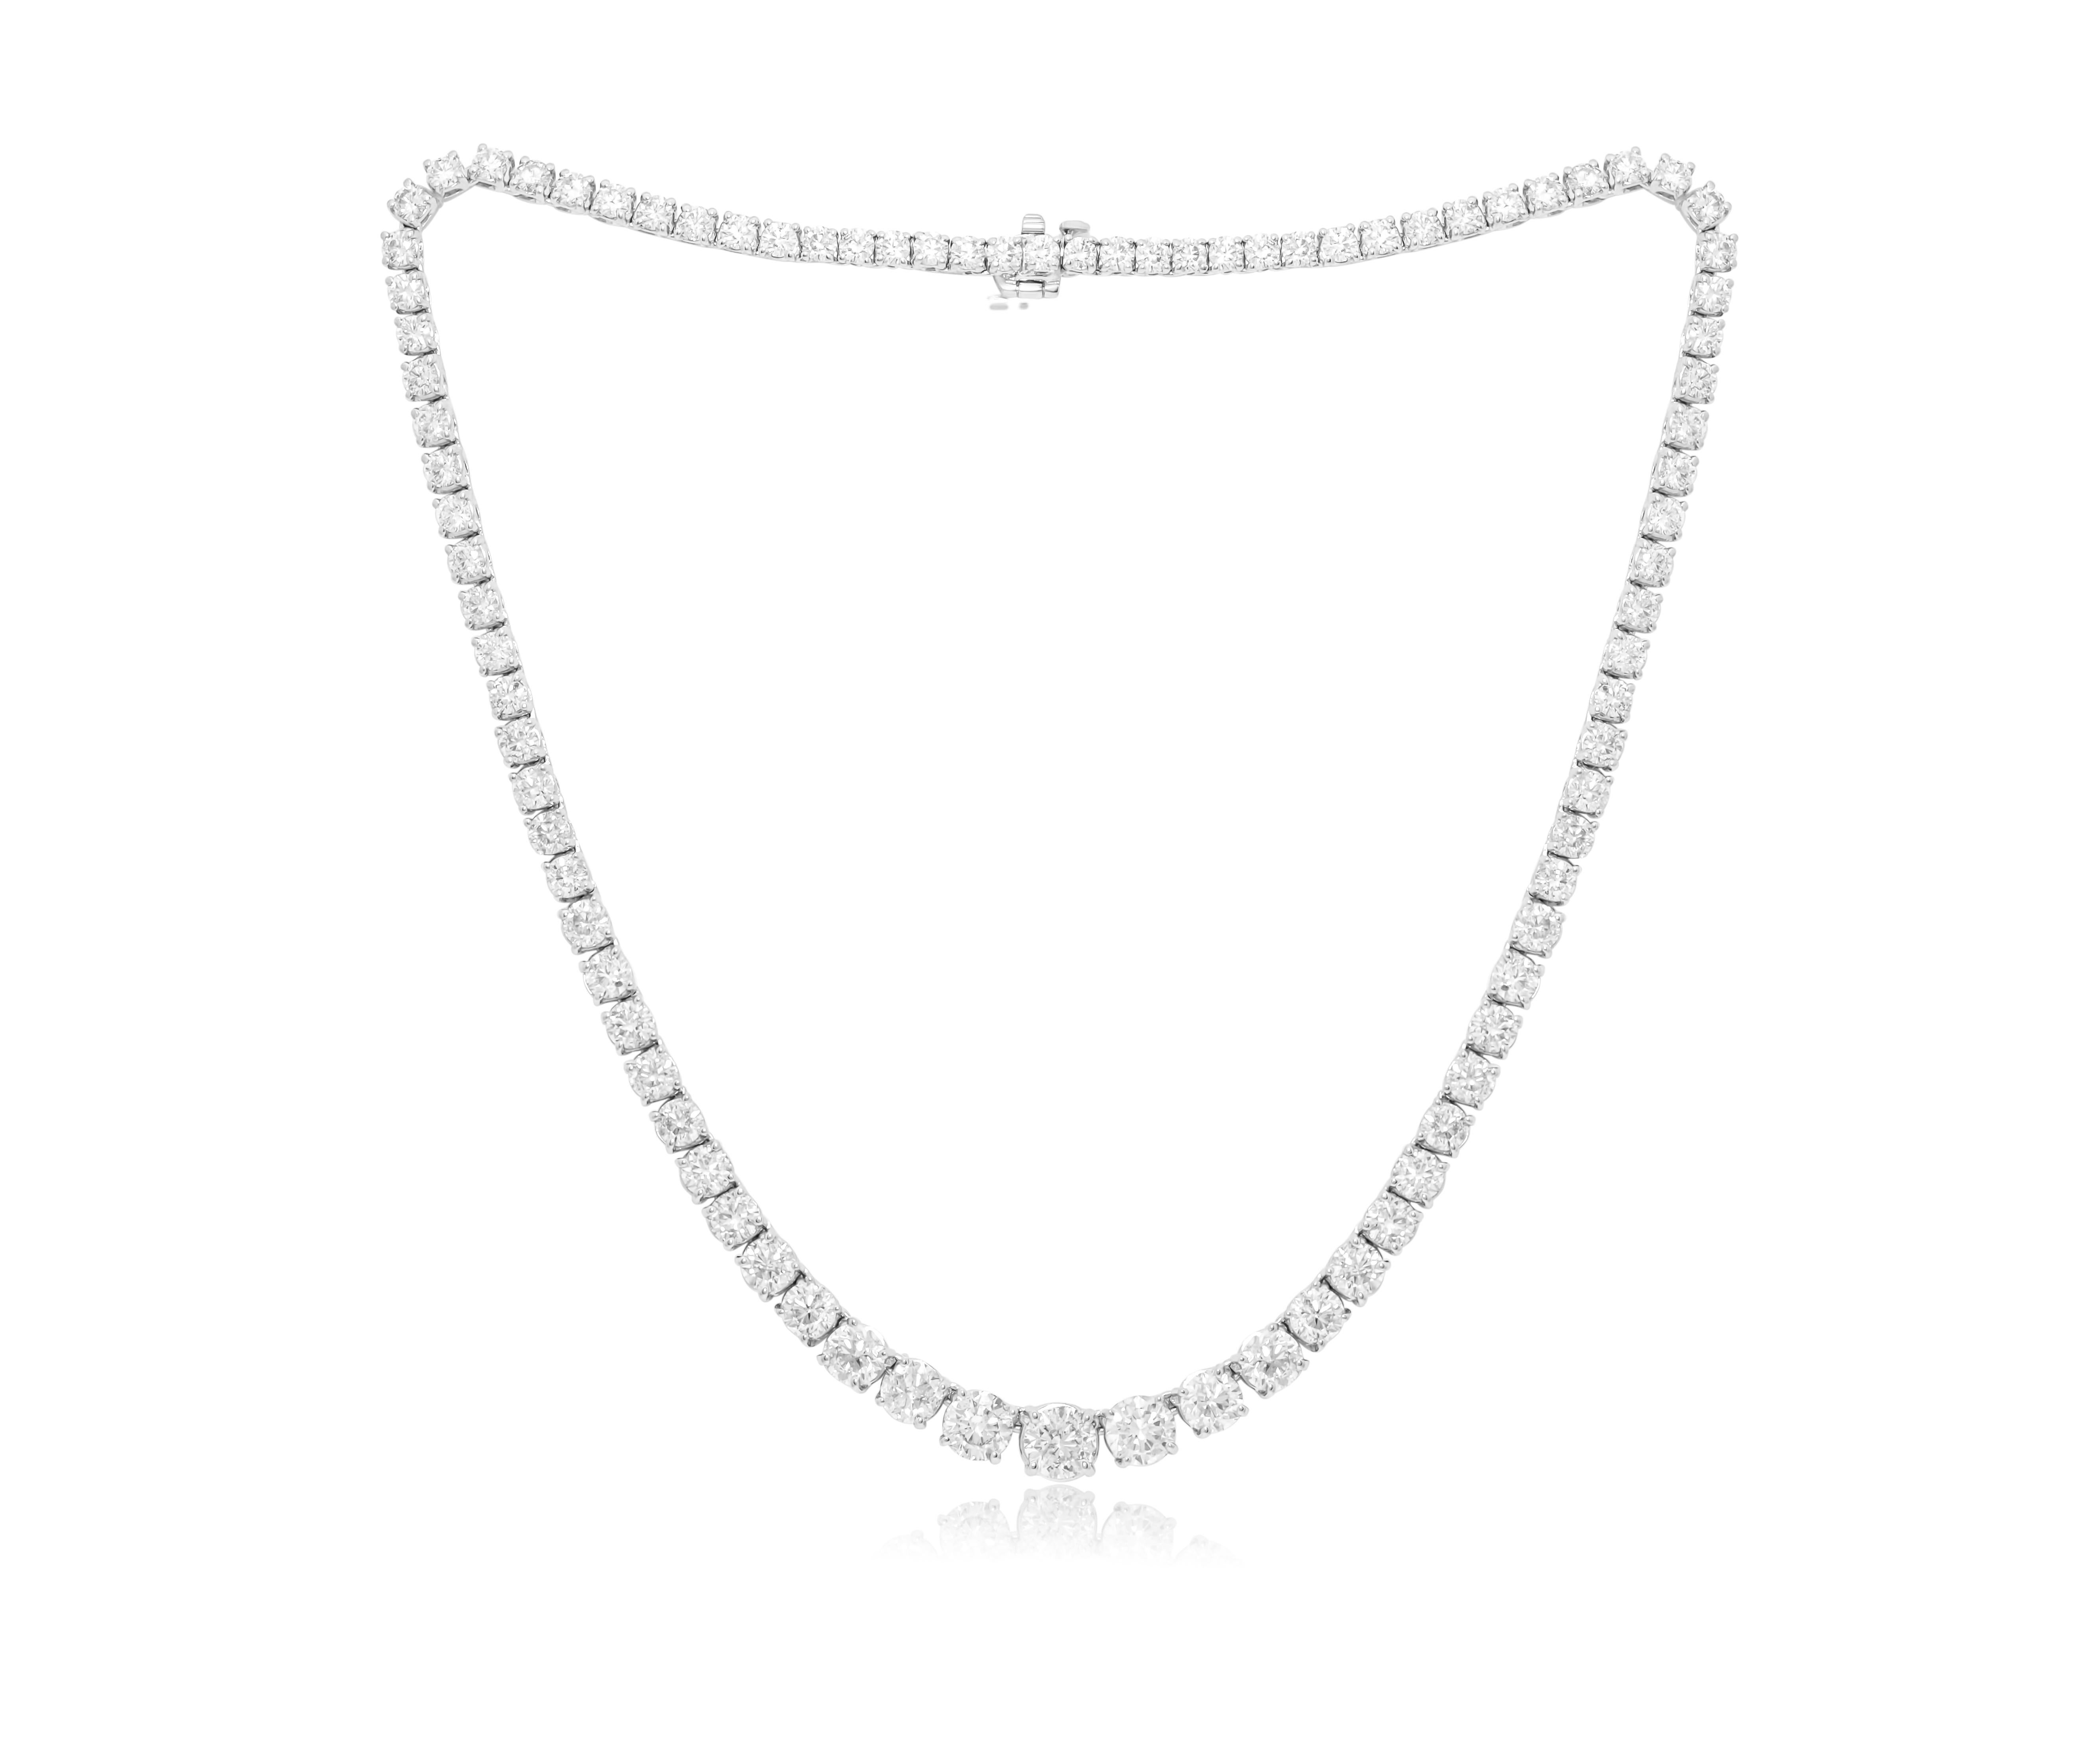 Custom 14k white gold graduated tennis necklace featuring 17.60 cts  round brilliant diamonds set in a 4 prong setting  107 stones  0.17 each FG color SI clarity. Excellent  cut. 
